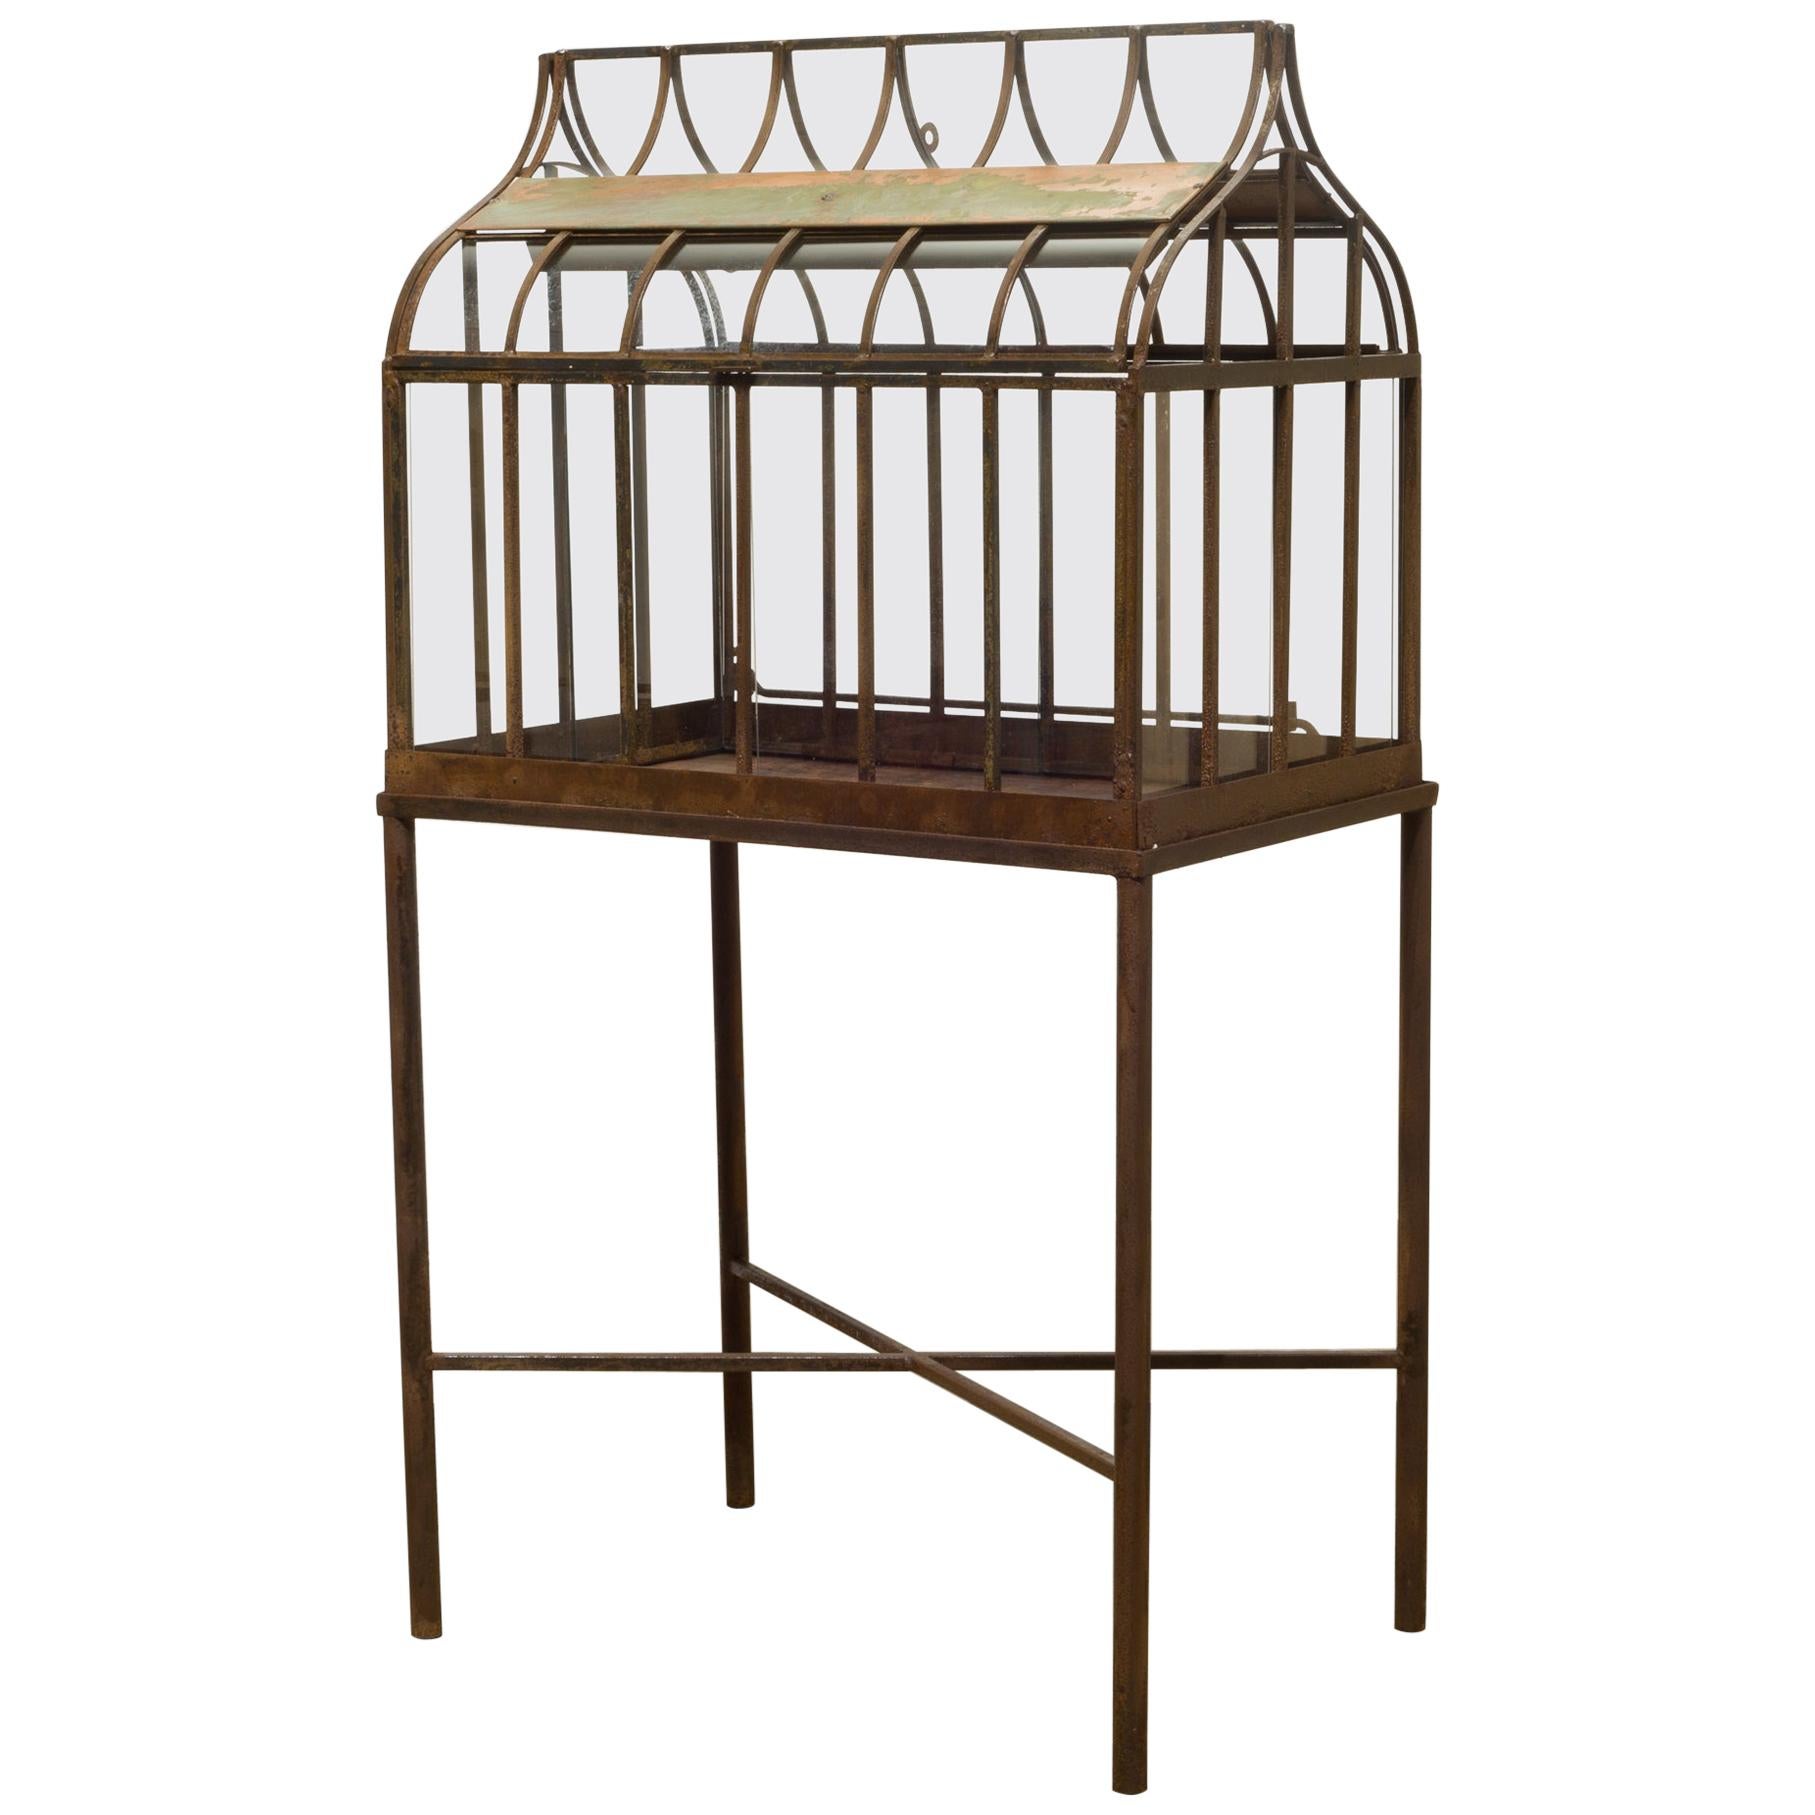 Turn of the Century Antique Wrought Iron Wardian Case on Stand, circa 1900